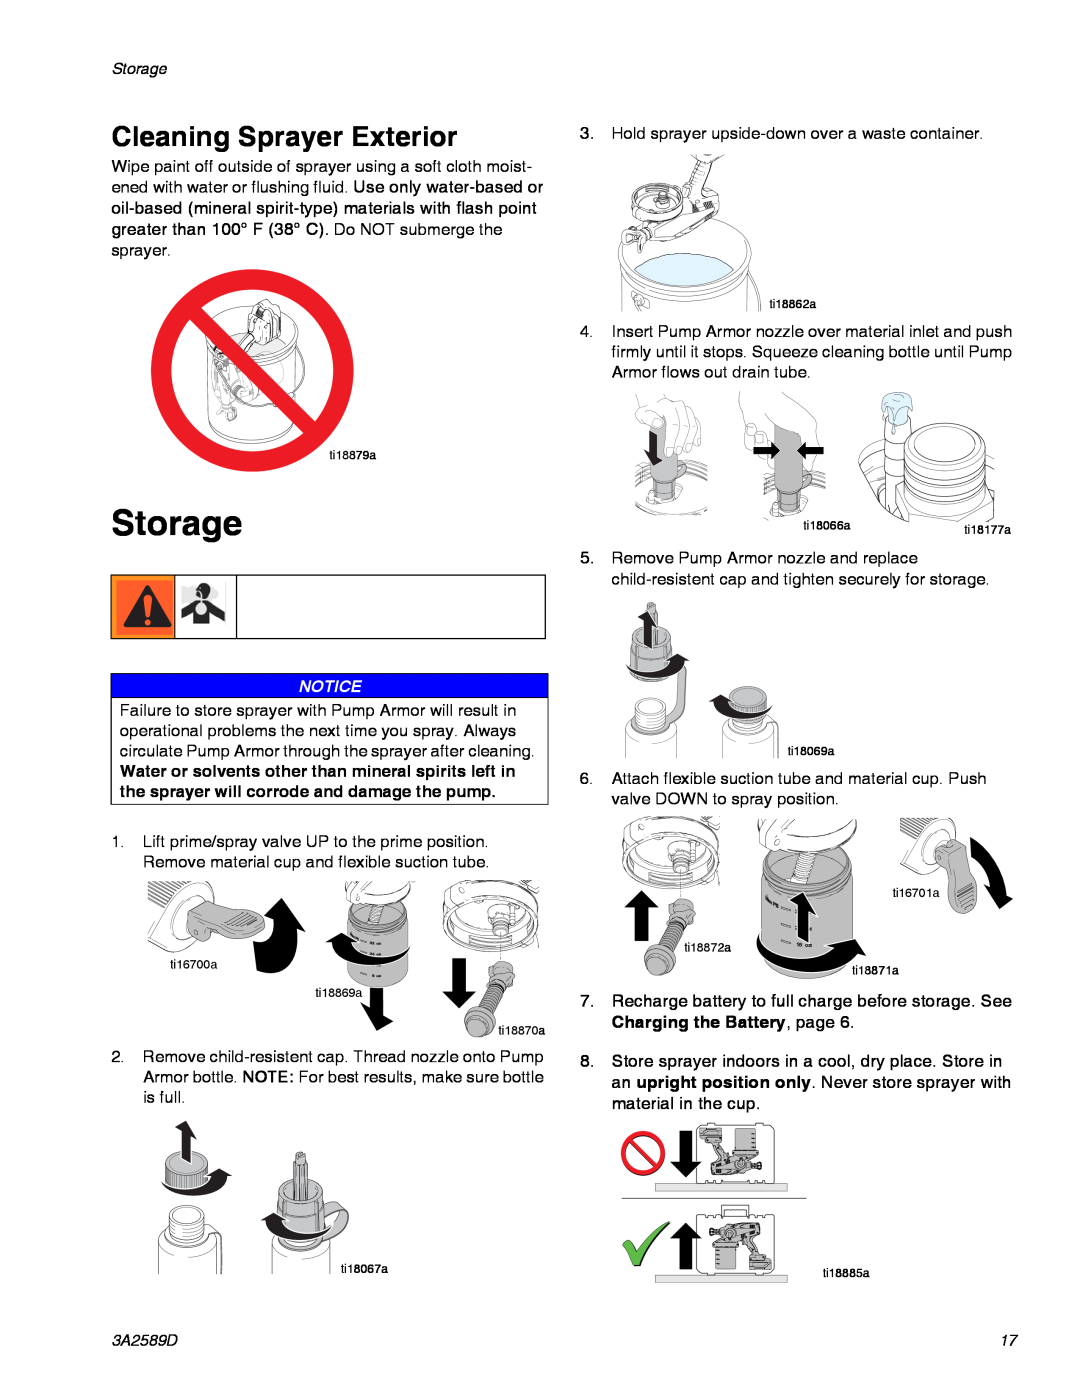 Graco 3A2589D important safety instructions Storage, Cleaning Sprayer Exterior 